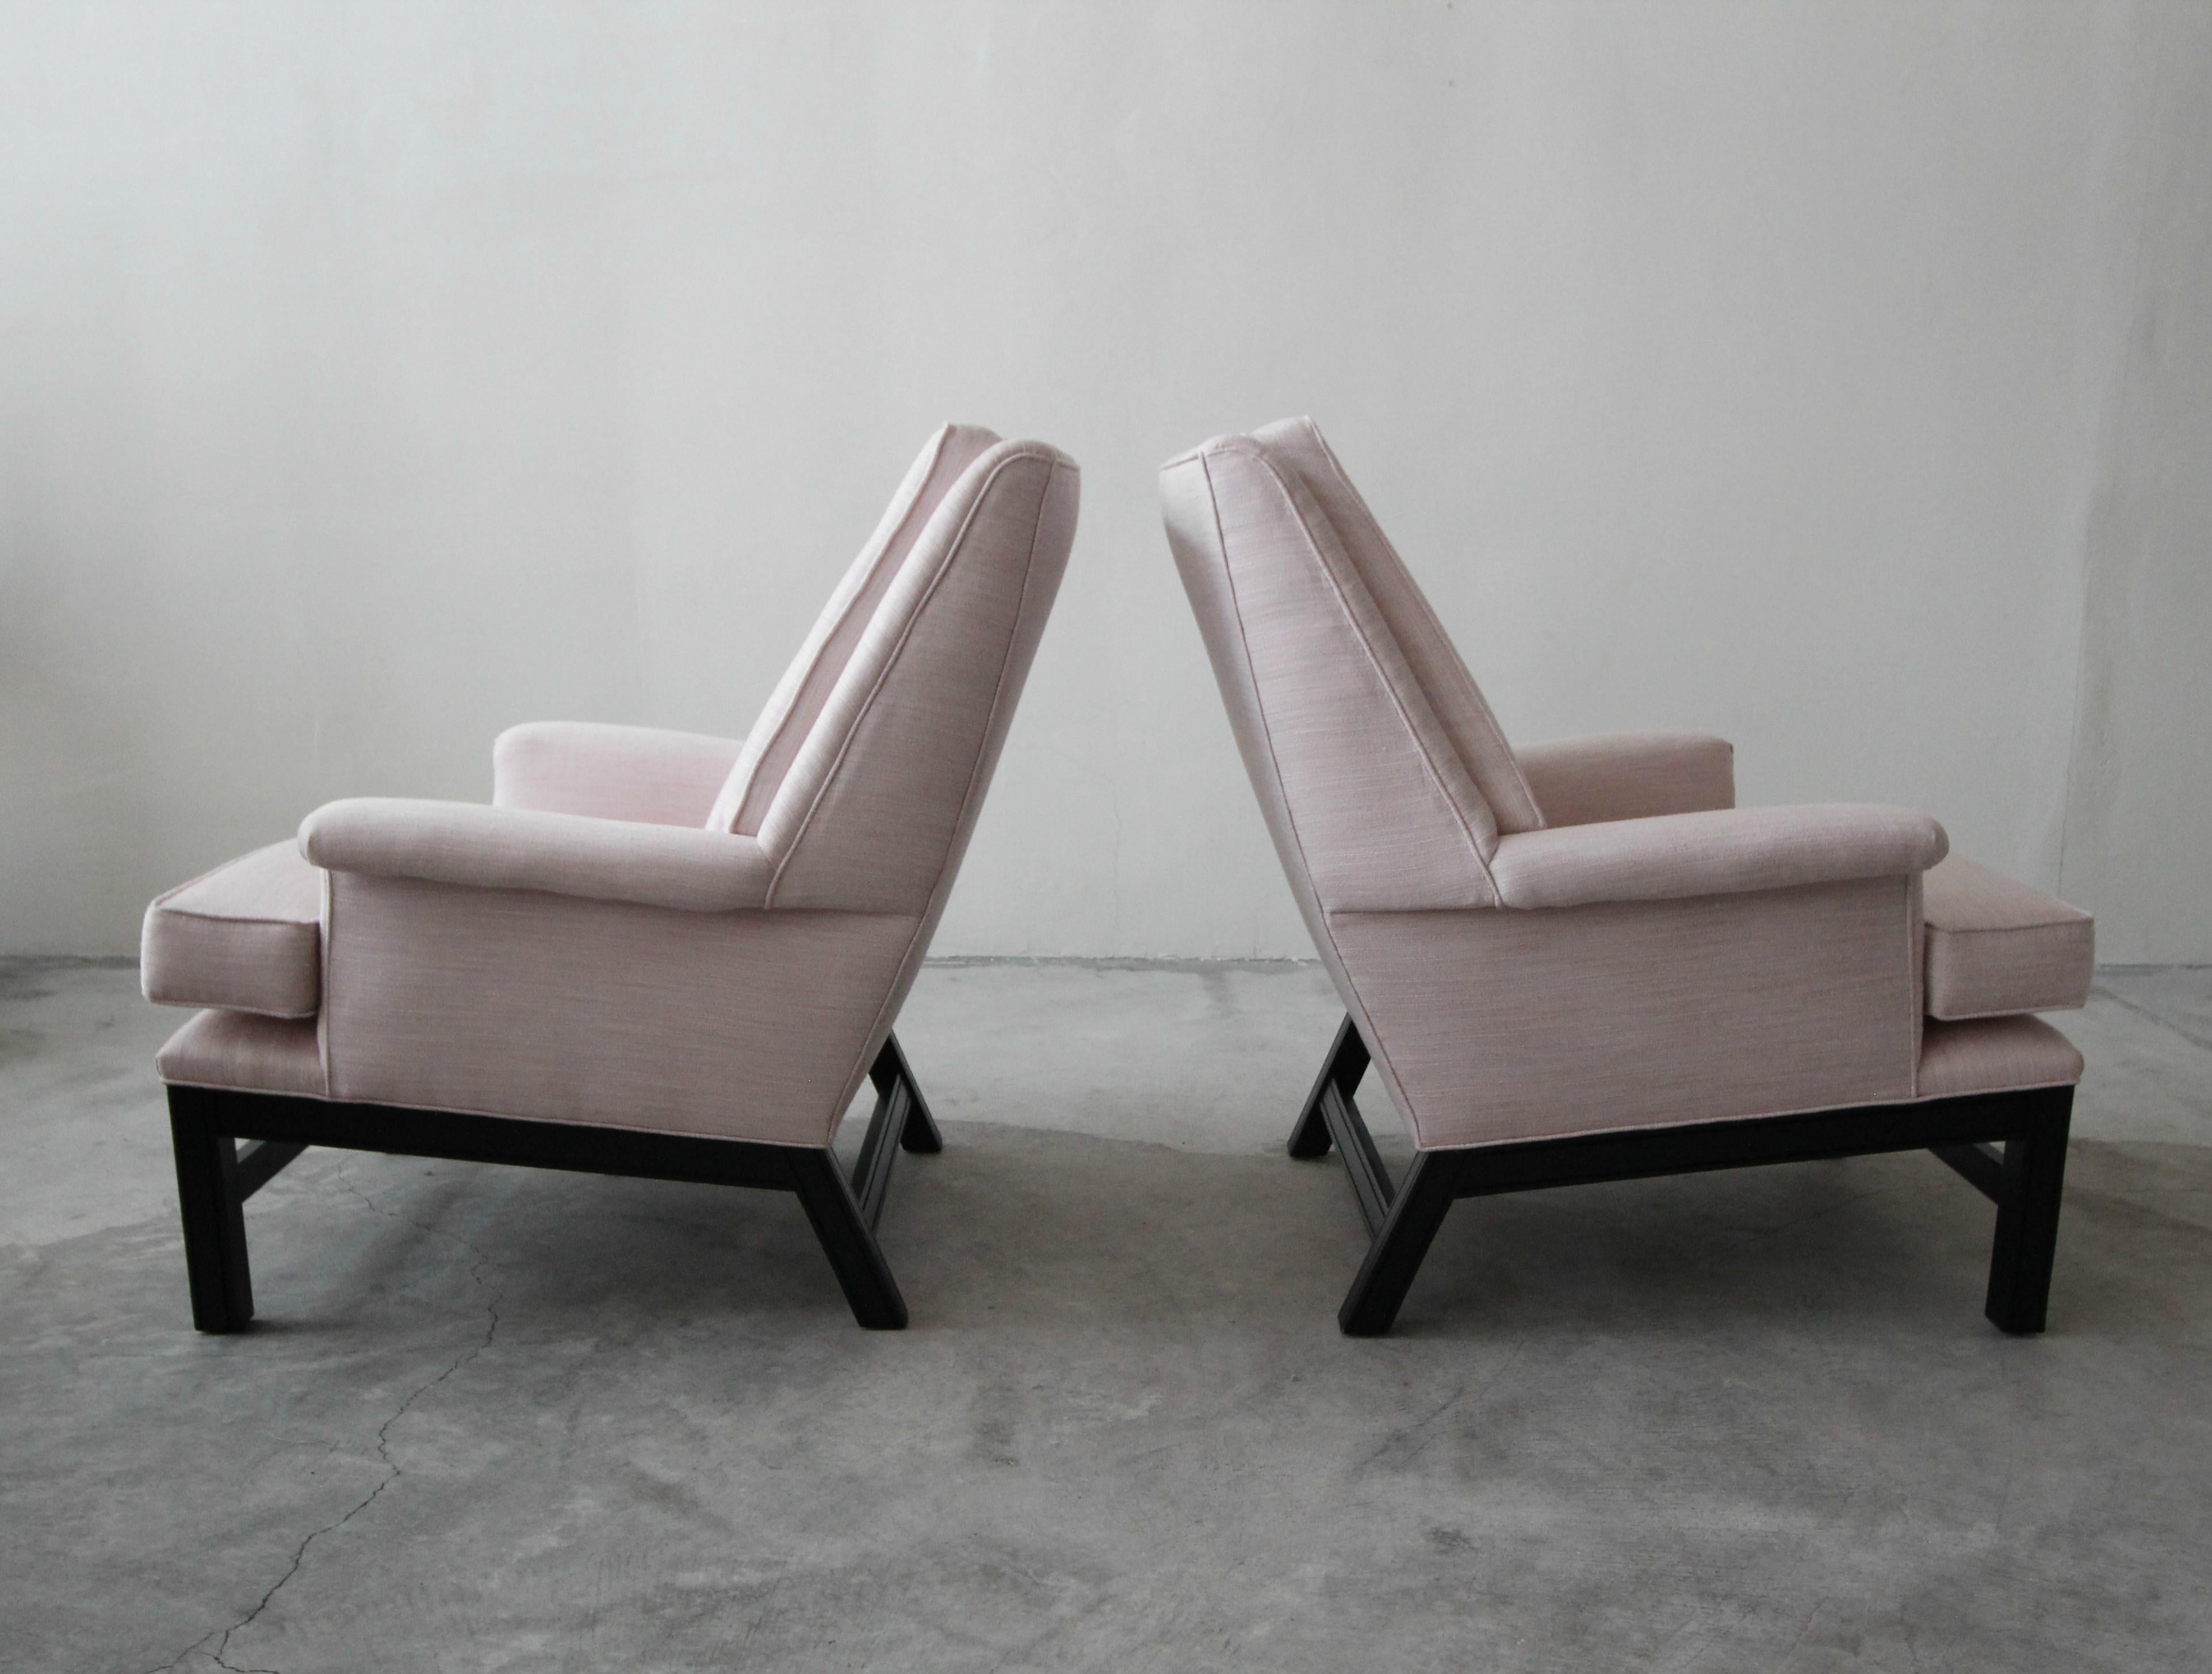 Large Pair of Mid-Century Modern Lounge Chairs 1